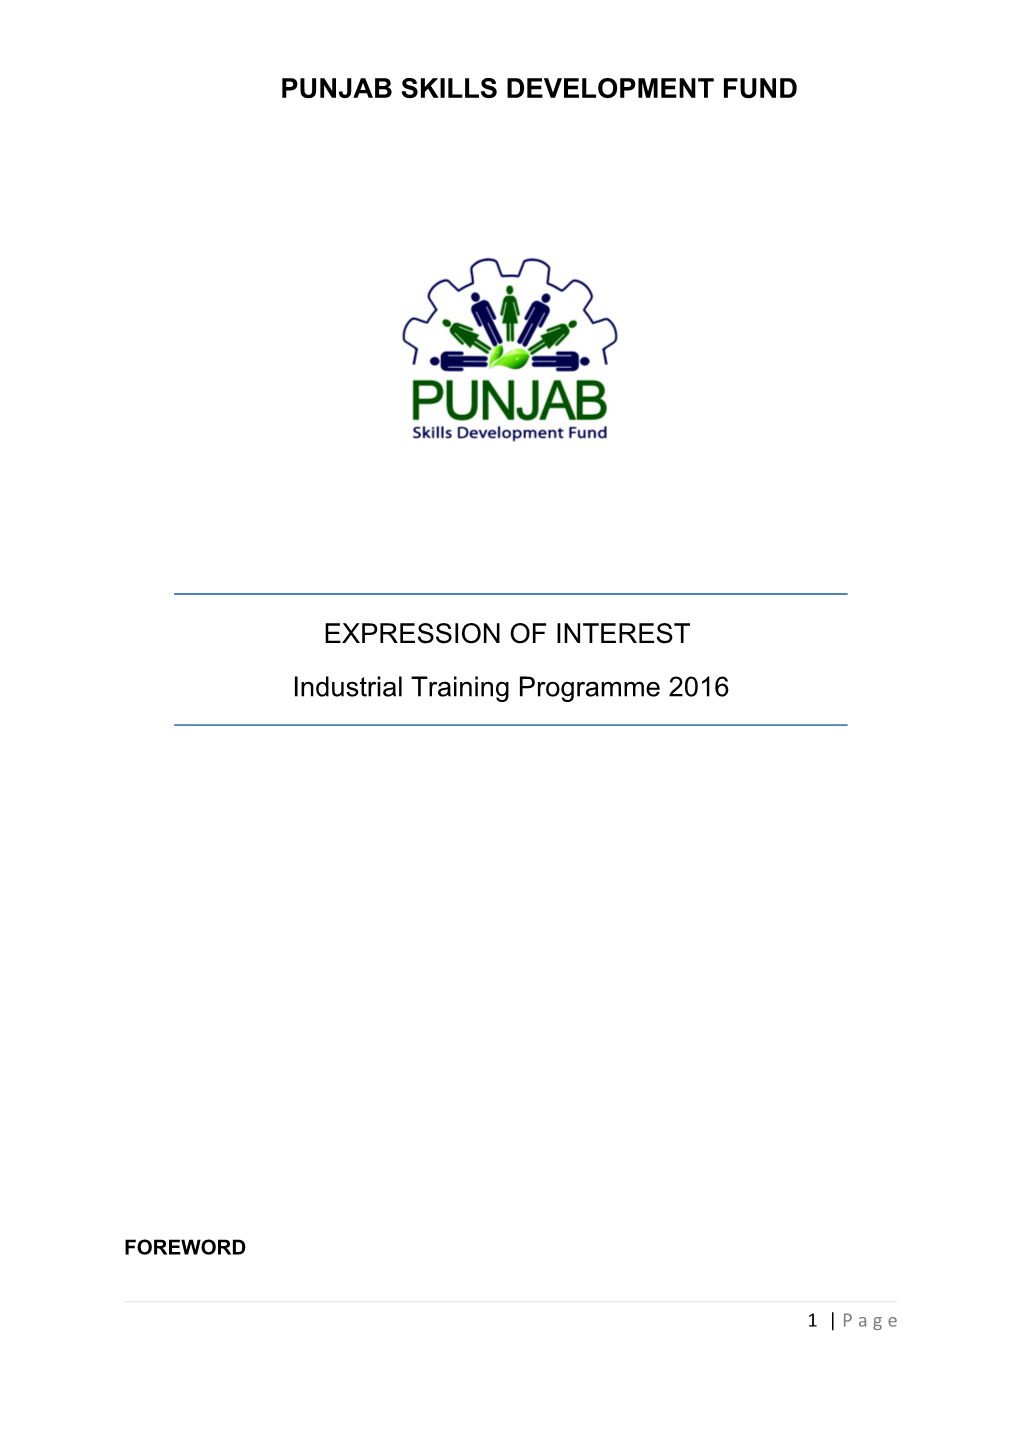 EXPRESSION of INTEREST Skills for Employability 2015 s1